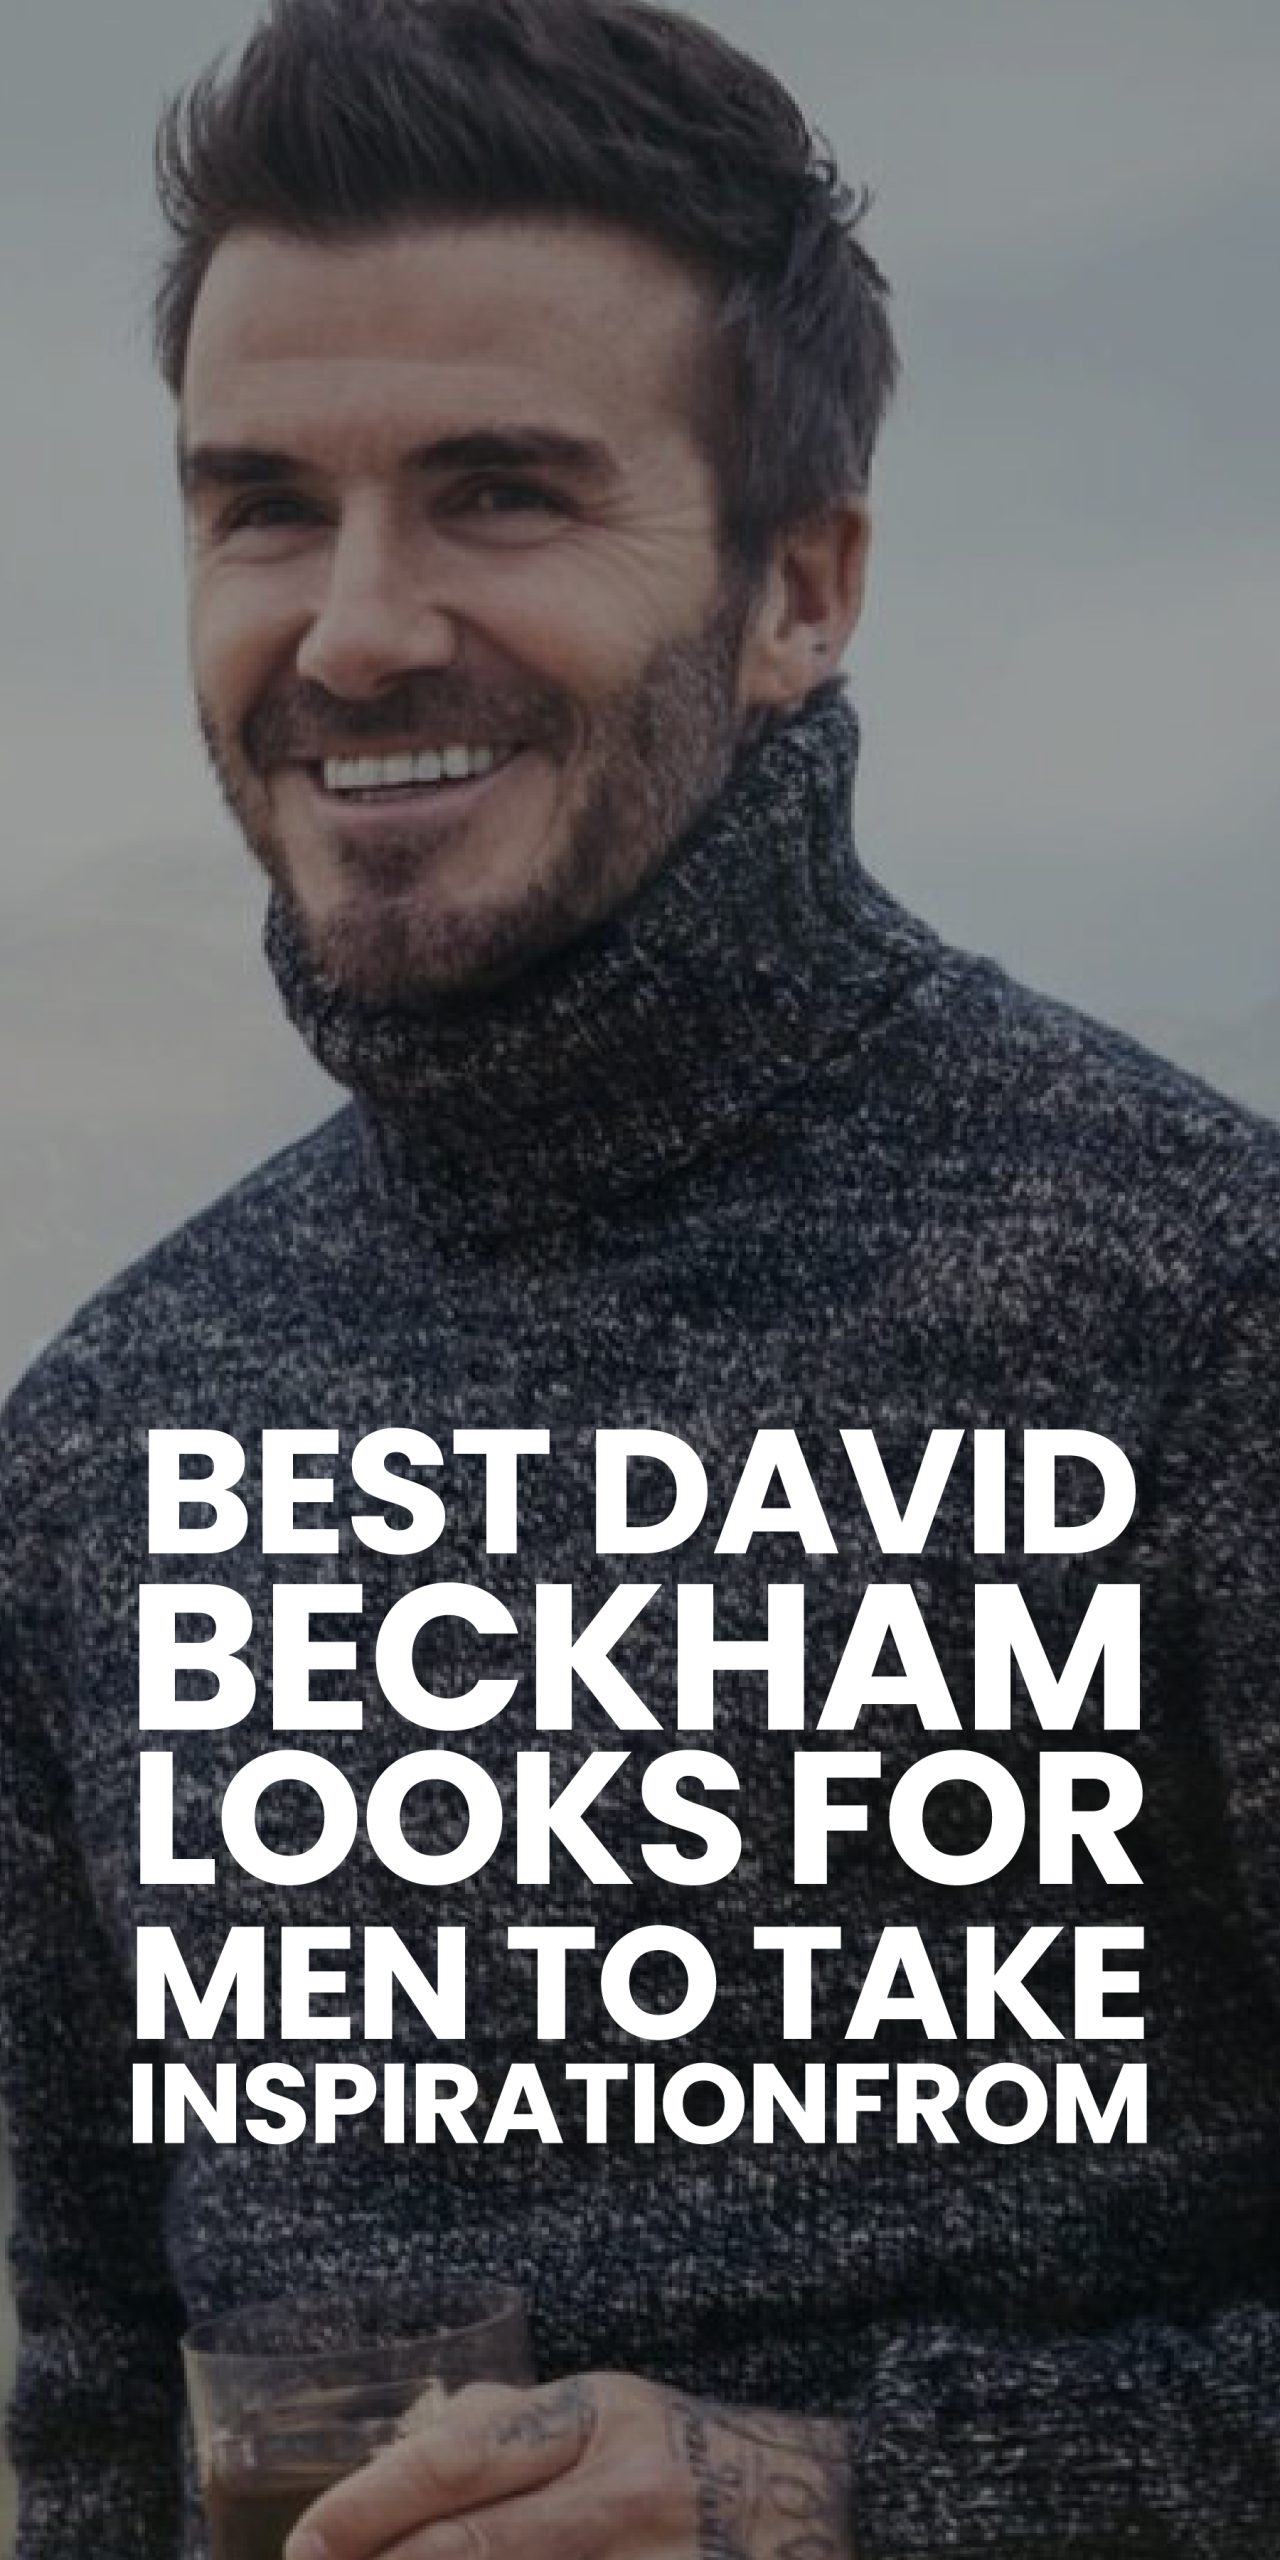 BEST DAVID BECKHAM LOOKS FOR MEN TO TAKE INSPIRATION FROM